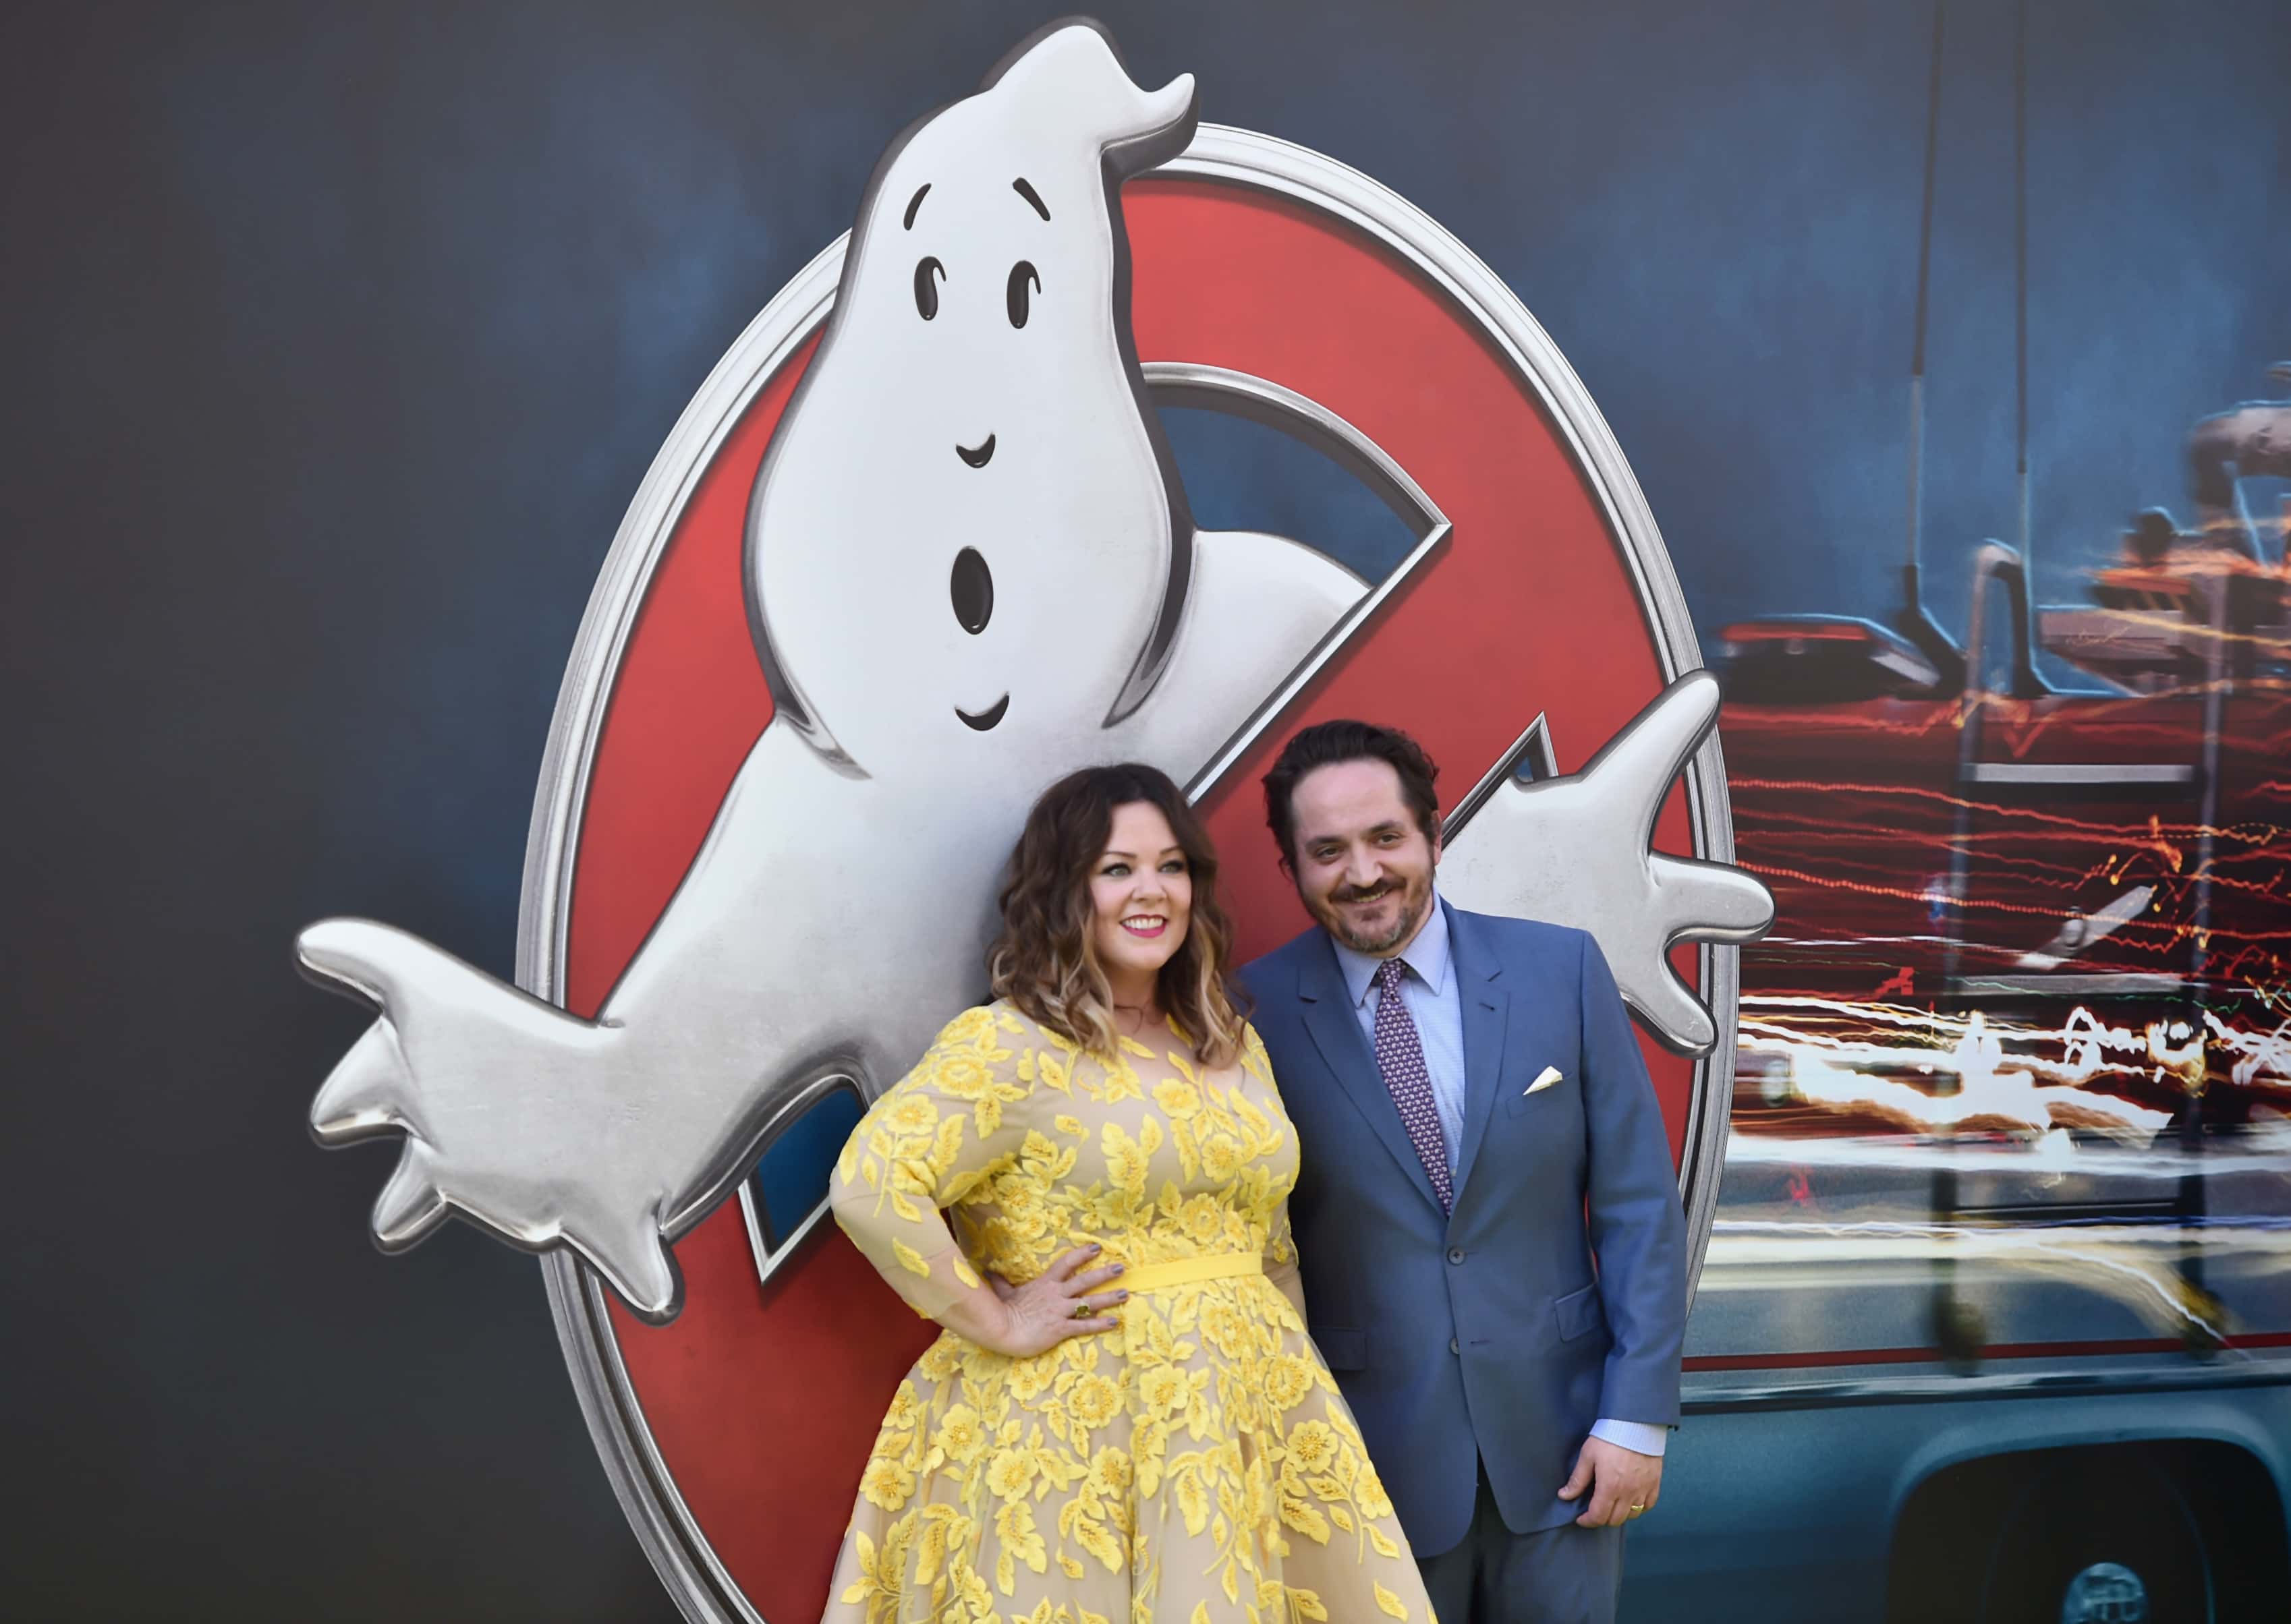 Premiere Of Sony Pictures' 'Ghostbusters' - Arrivals. Melissa McCarthy and director Ben Falcone.